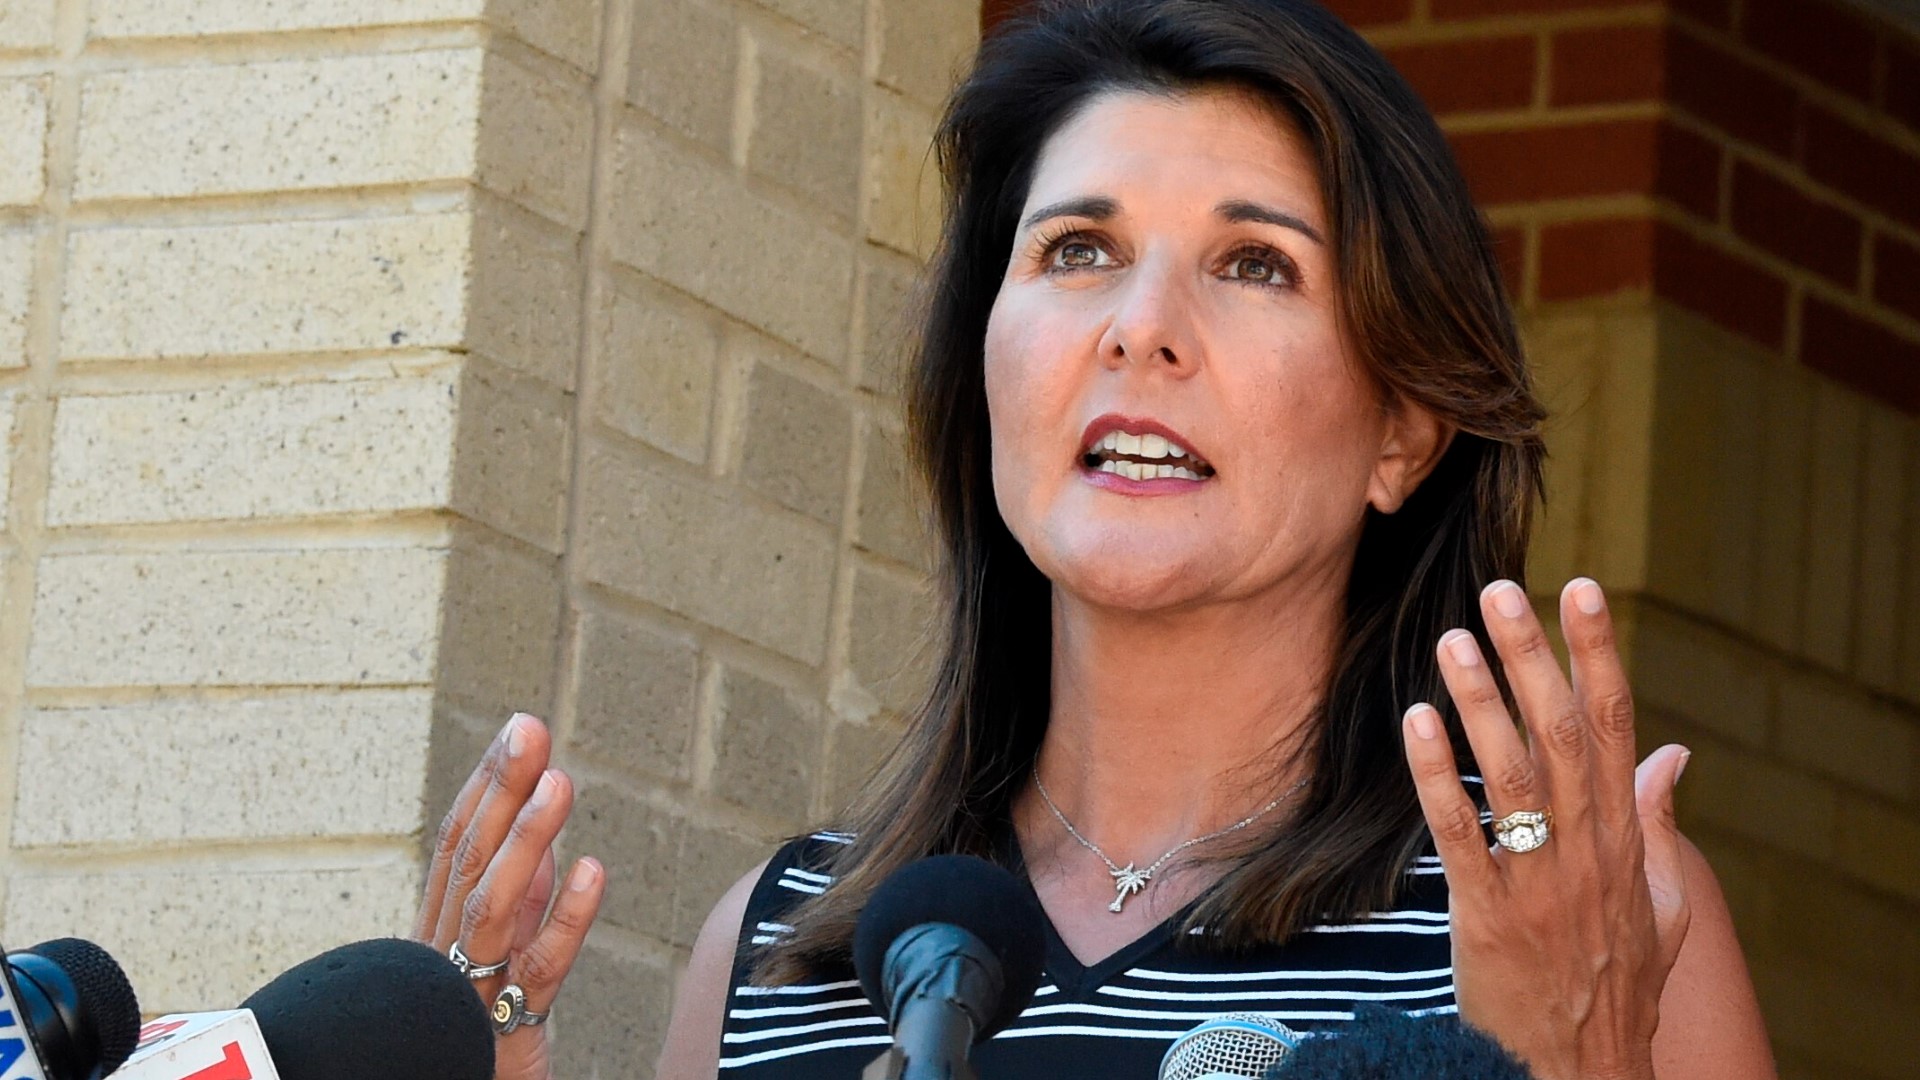 Former U.N. Ambassador and South Carolina Gov. Nikki Haley said she won't run against former President Donald Trump if he were to decide to run for the White House.